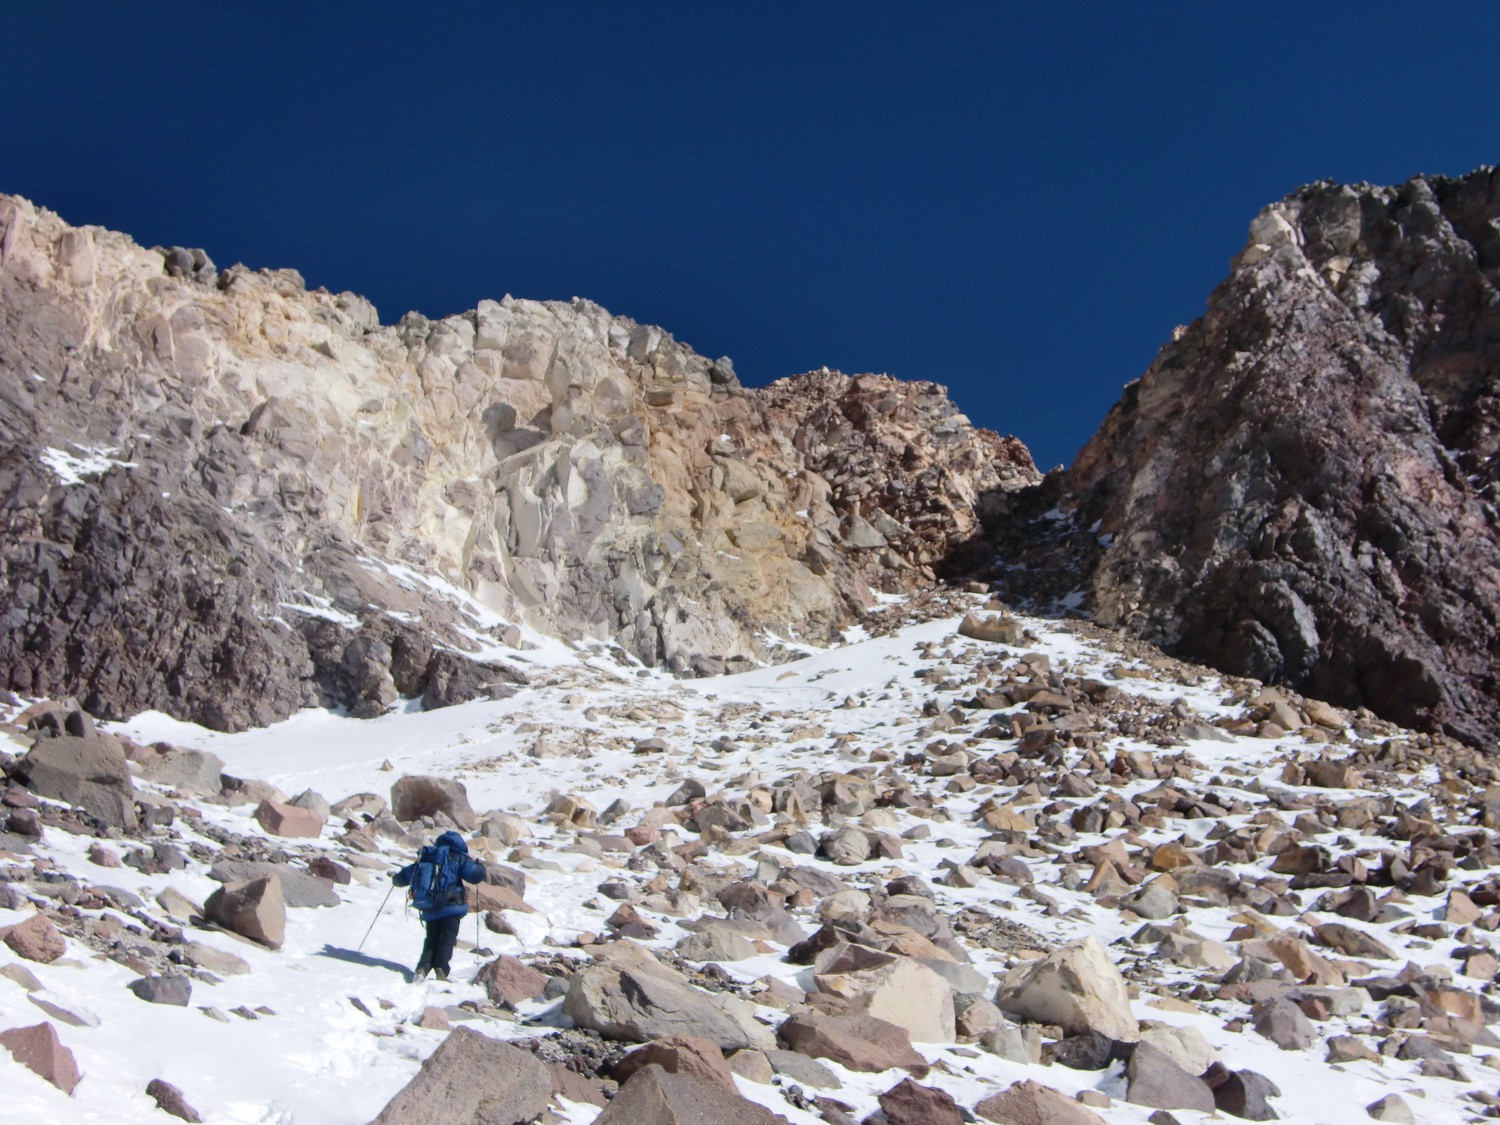 The final steps in the crater of Ojos del Salado: Up the gully and the ridge on its right side